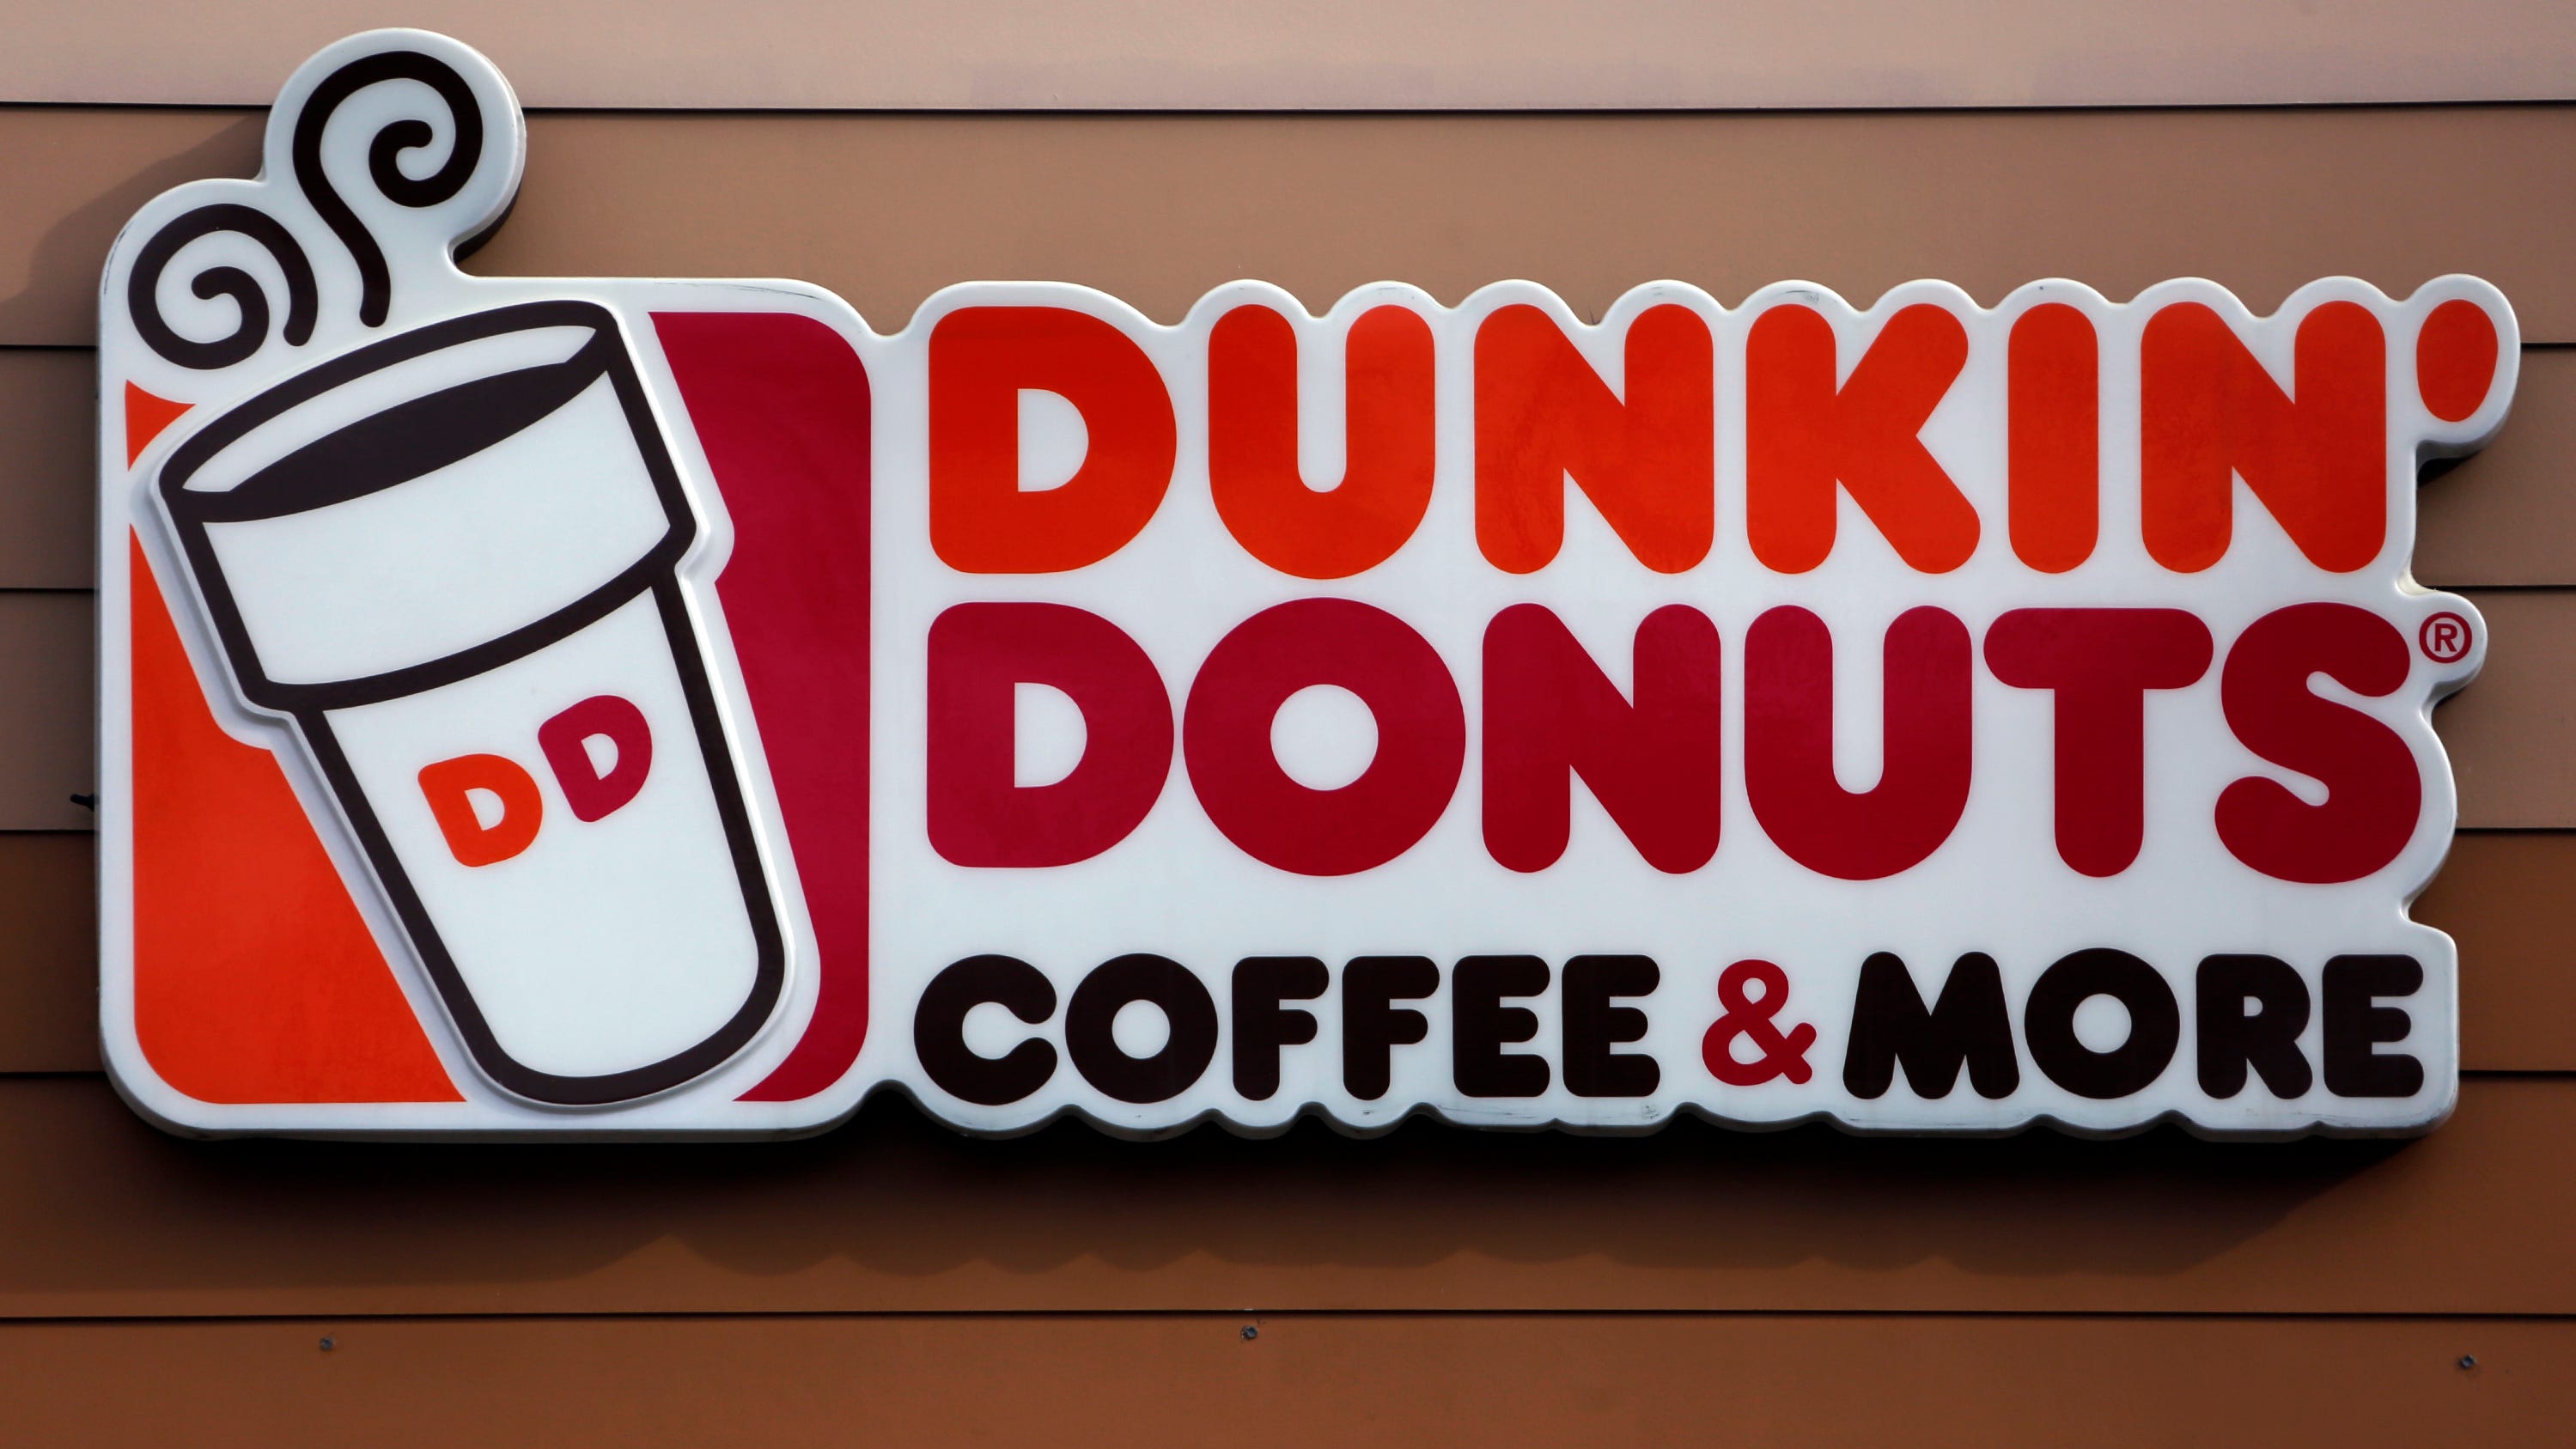 Dunkin' Donuts drops donuts – but just from its brand name